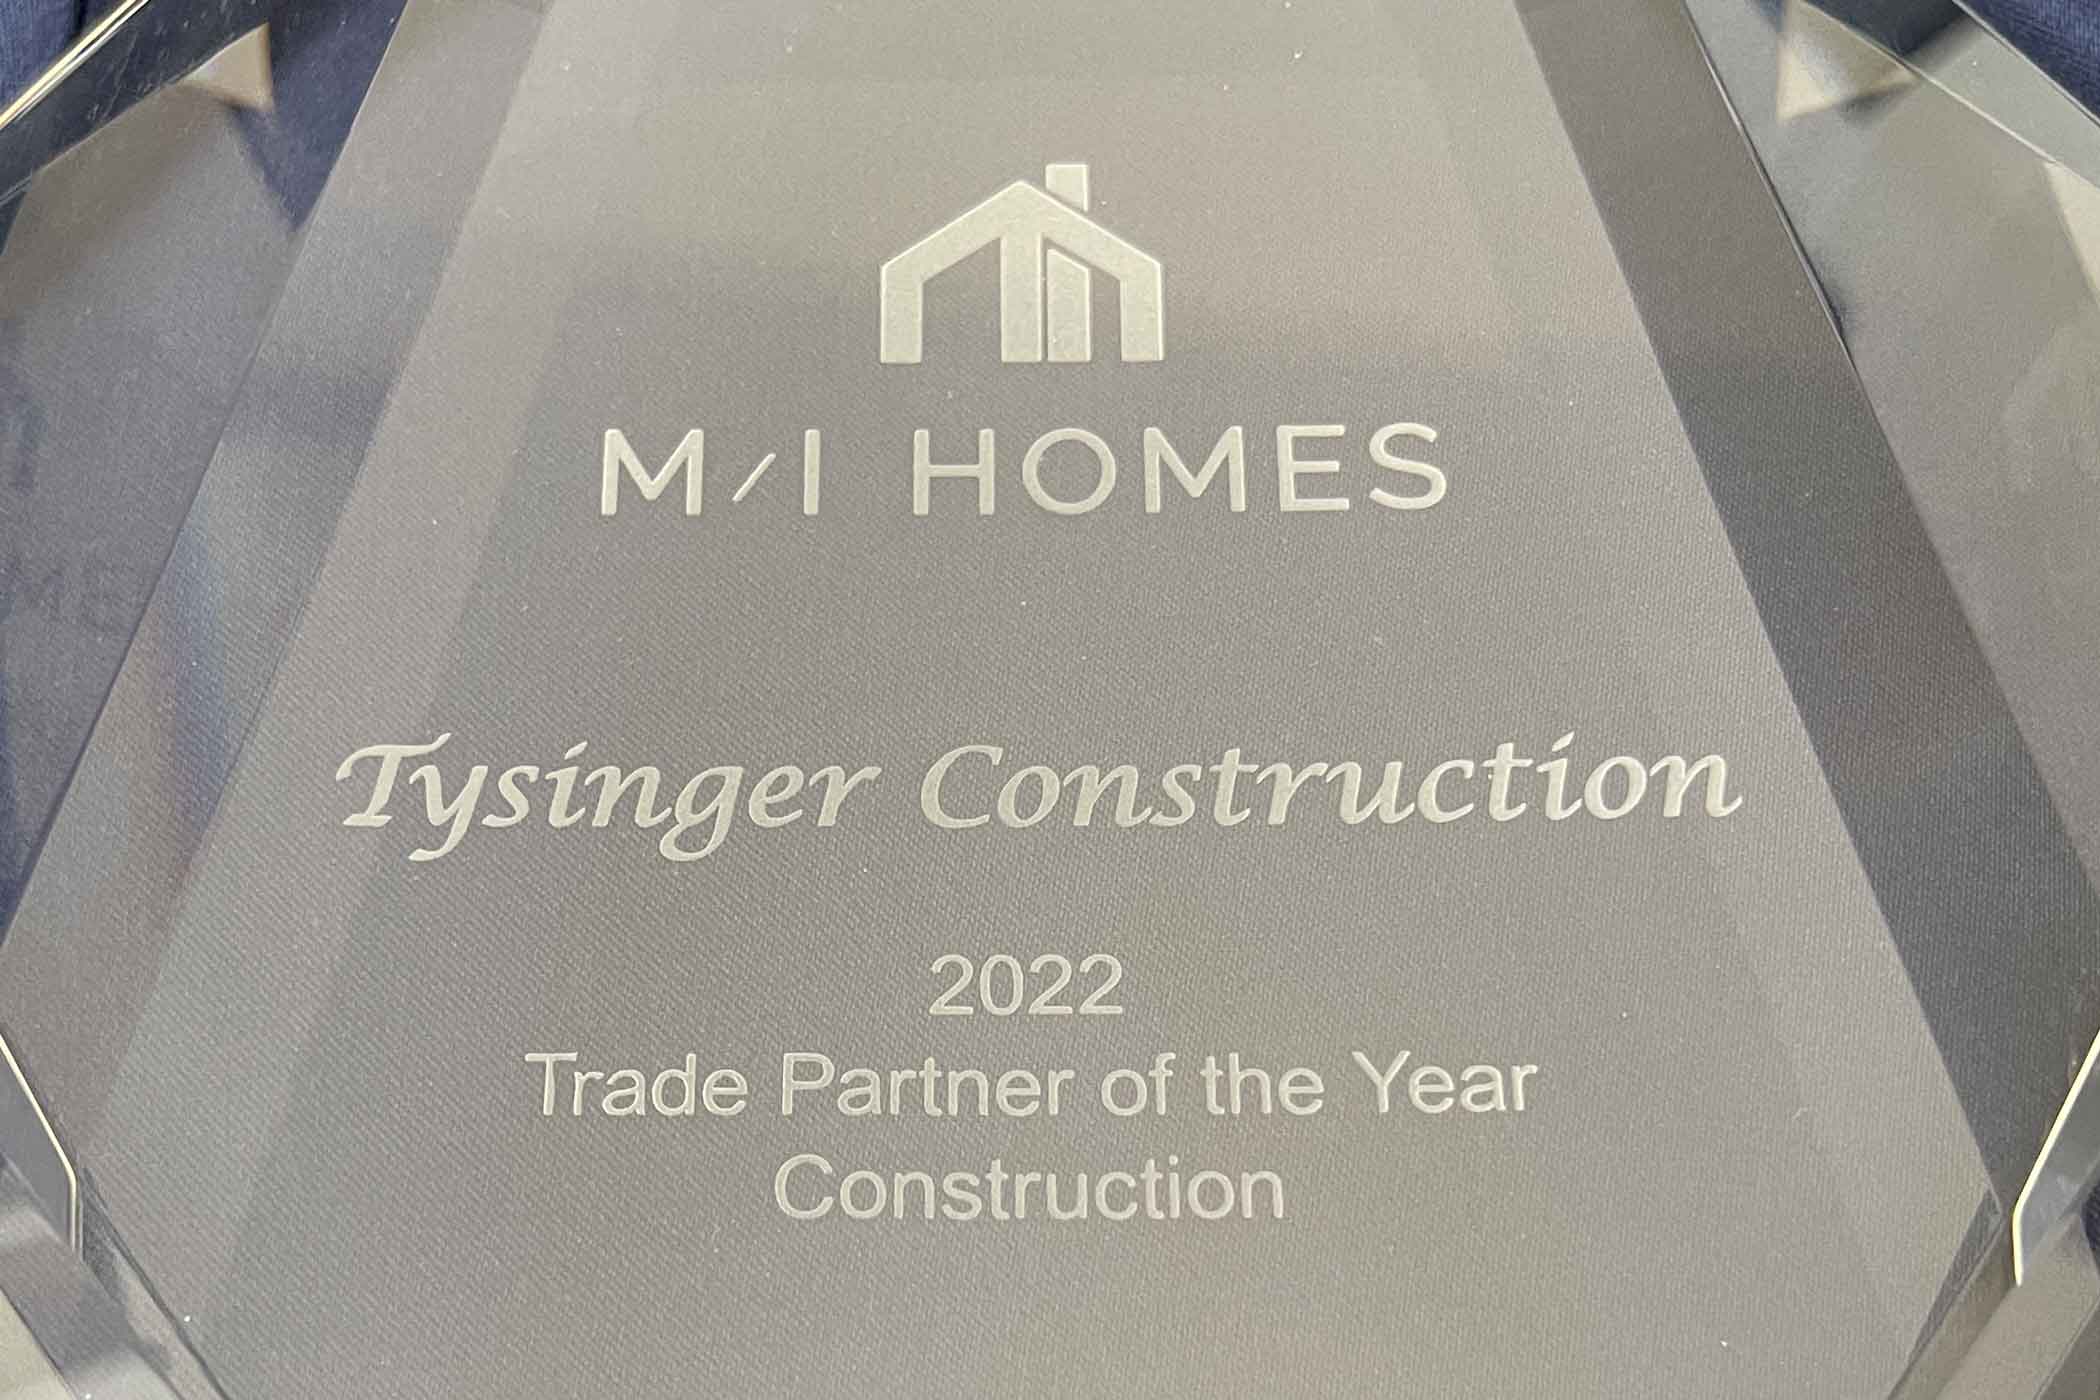 M/I Homes Partner of the Year trophy